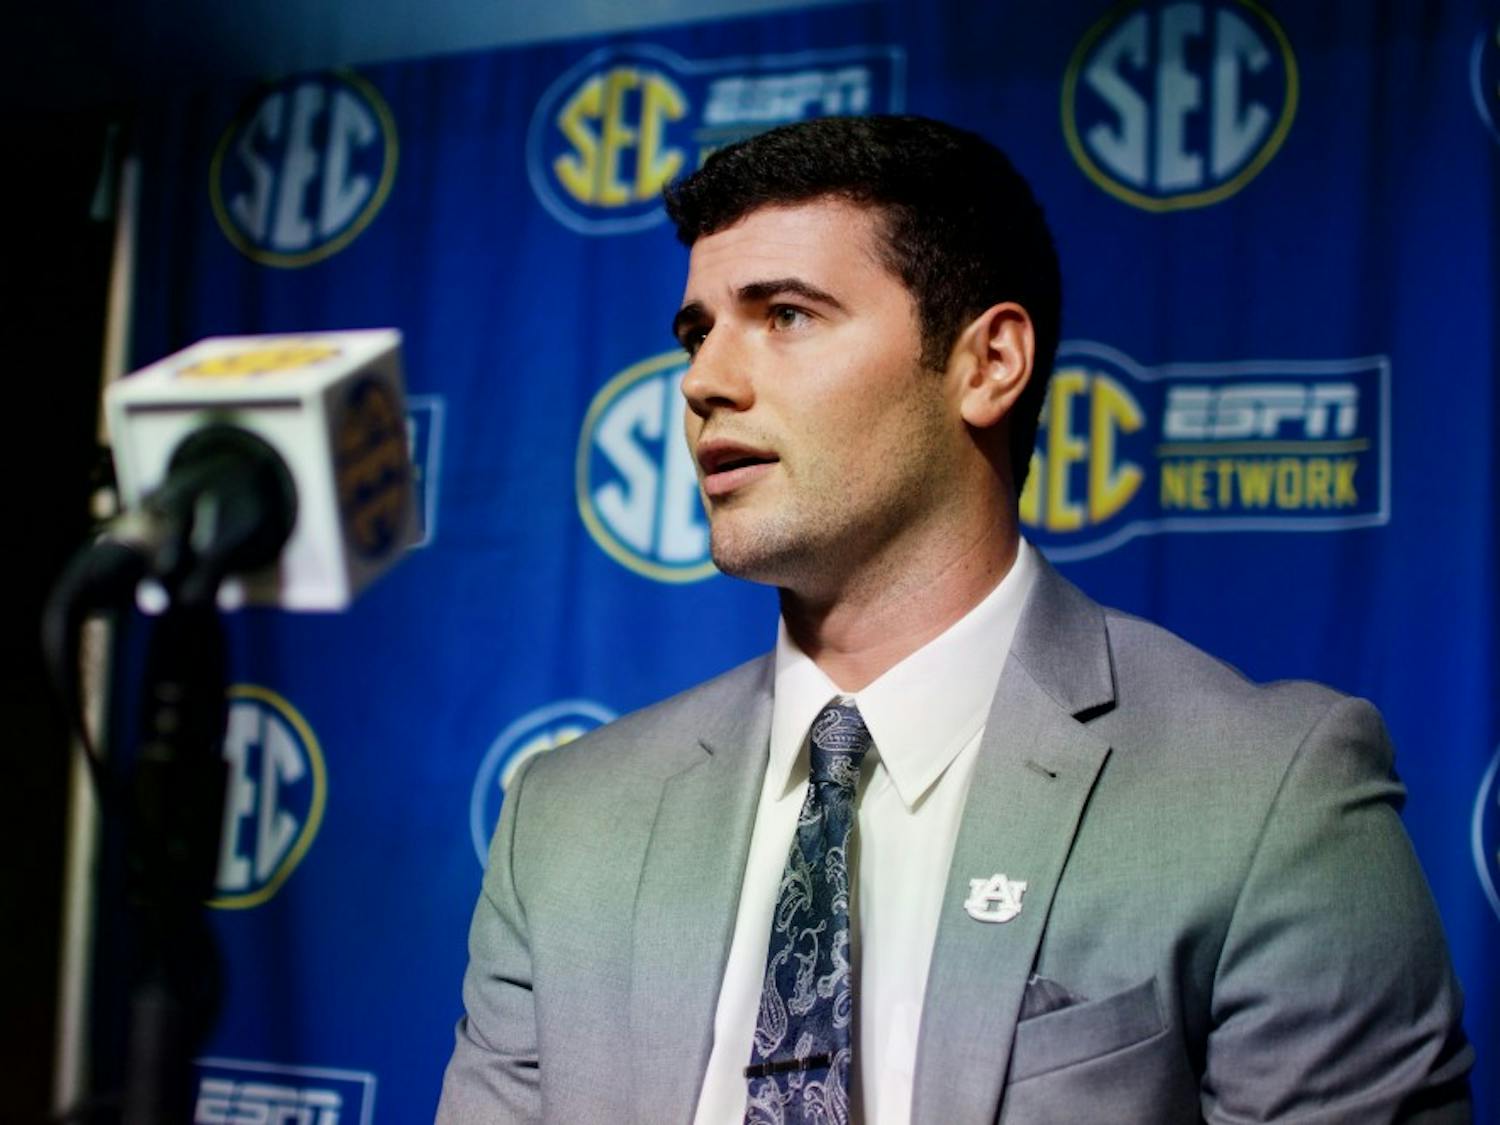 Jarrett Stidham answers a question during an interview at SEC Media Days in the College Football Hall of Fame on Thursday, July 19, 2018 in Atlanta, Ga.